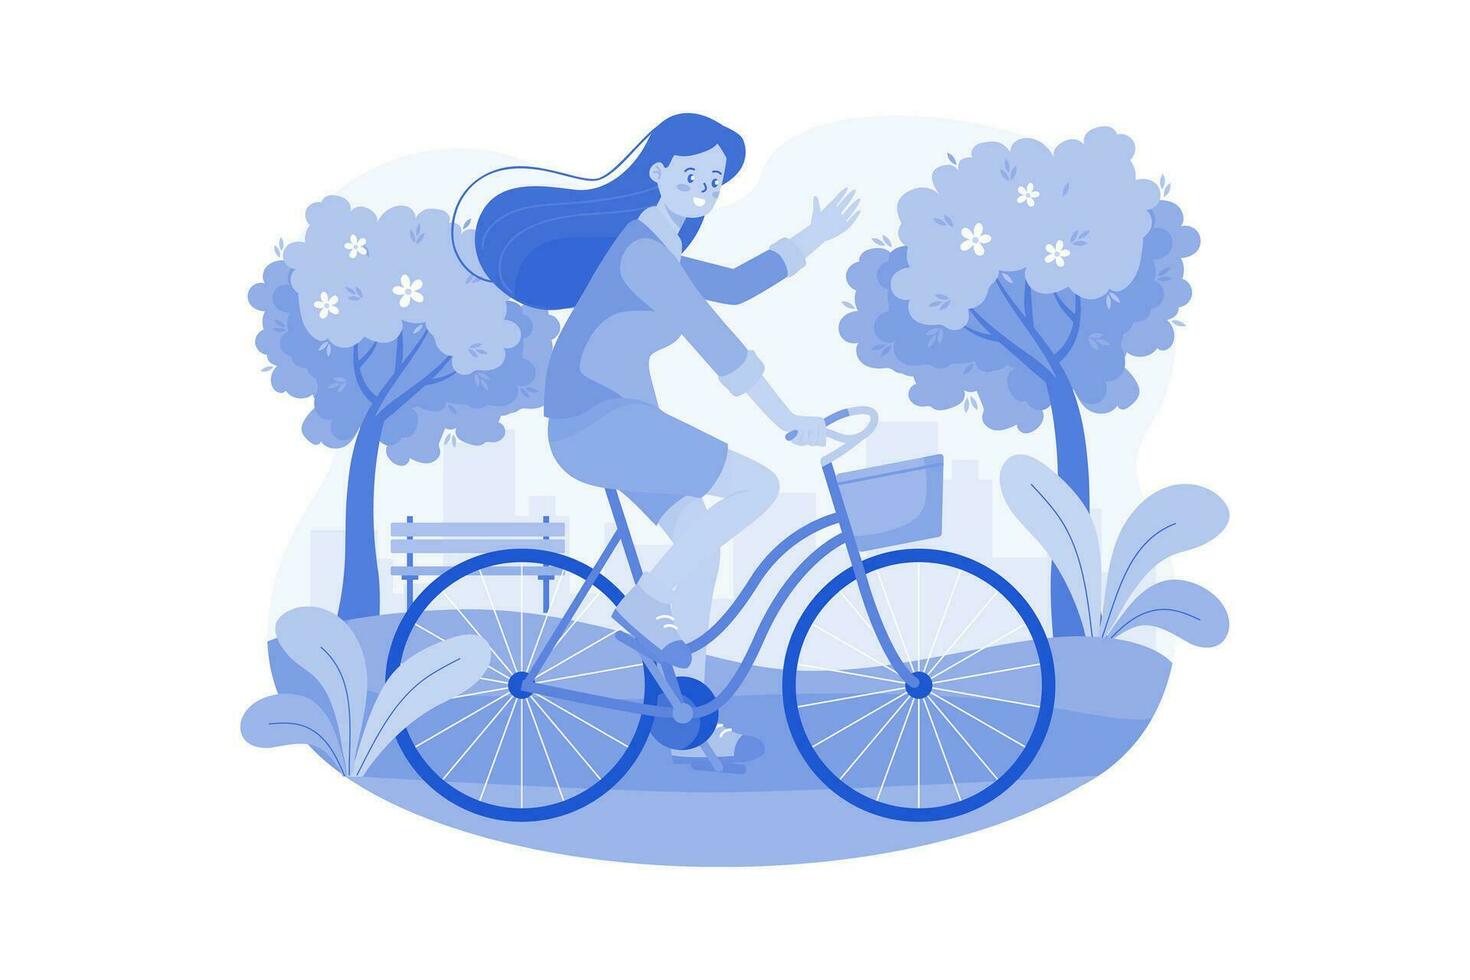 Girl Riding A Bicycle Illustration concept on a white background vector